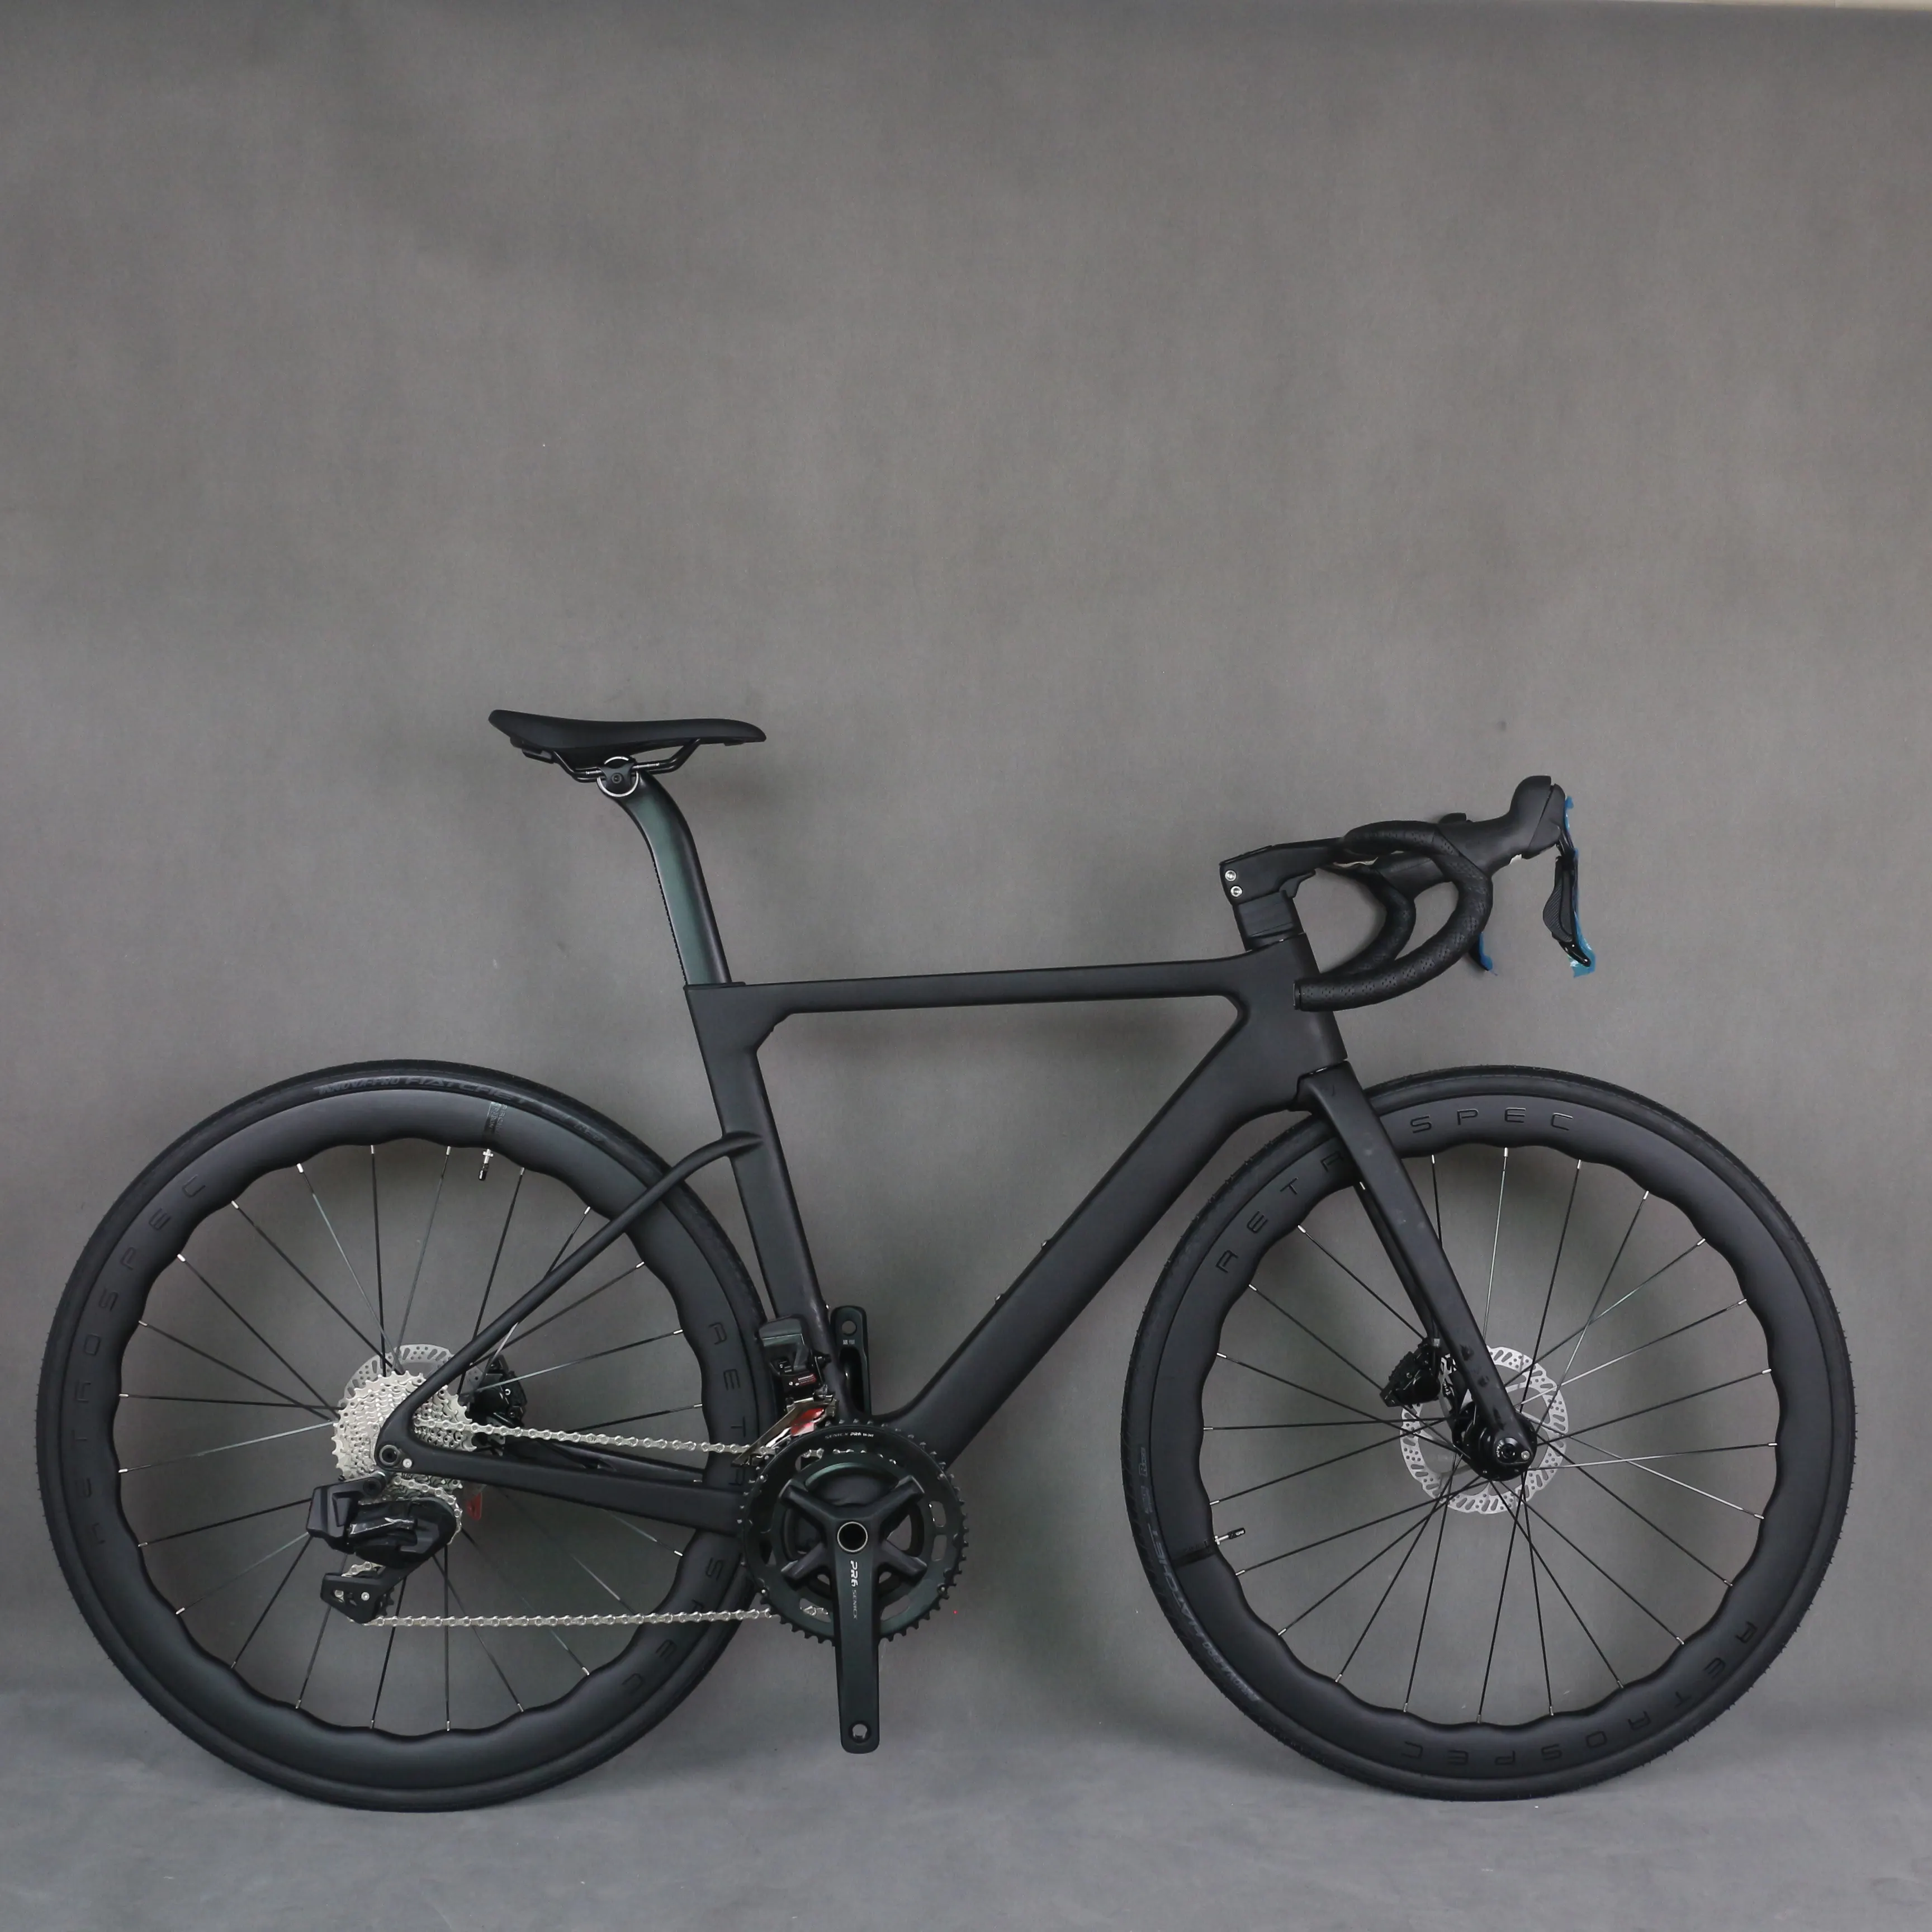 New Carbon frame T1000 Disc Road Bike TT-X42 Carbon Fiber 24 Speed Di2 Hydraulic Groupset With Carbon Wheels